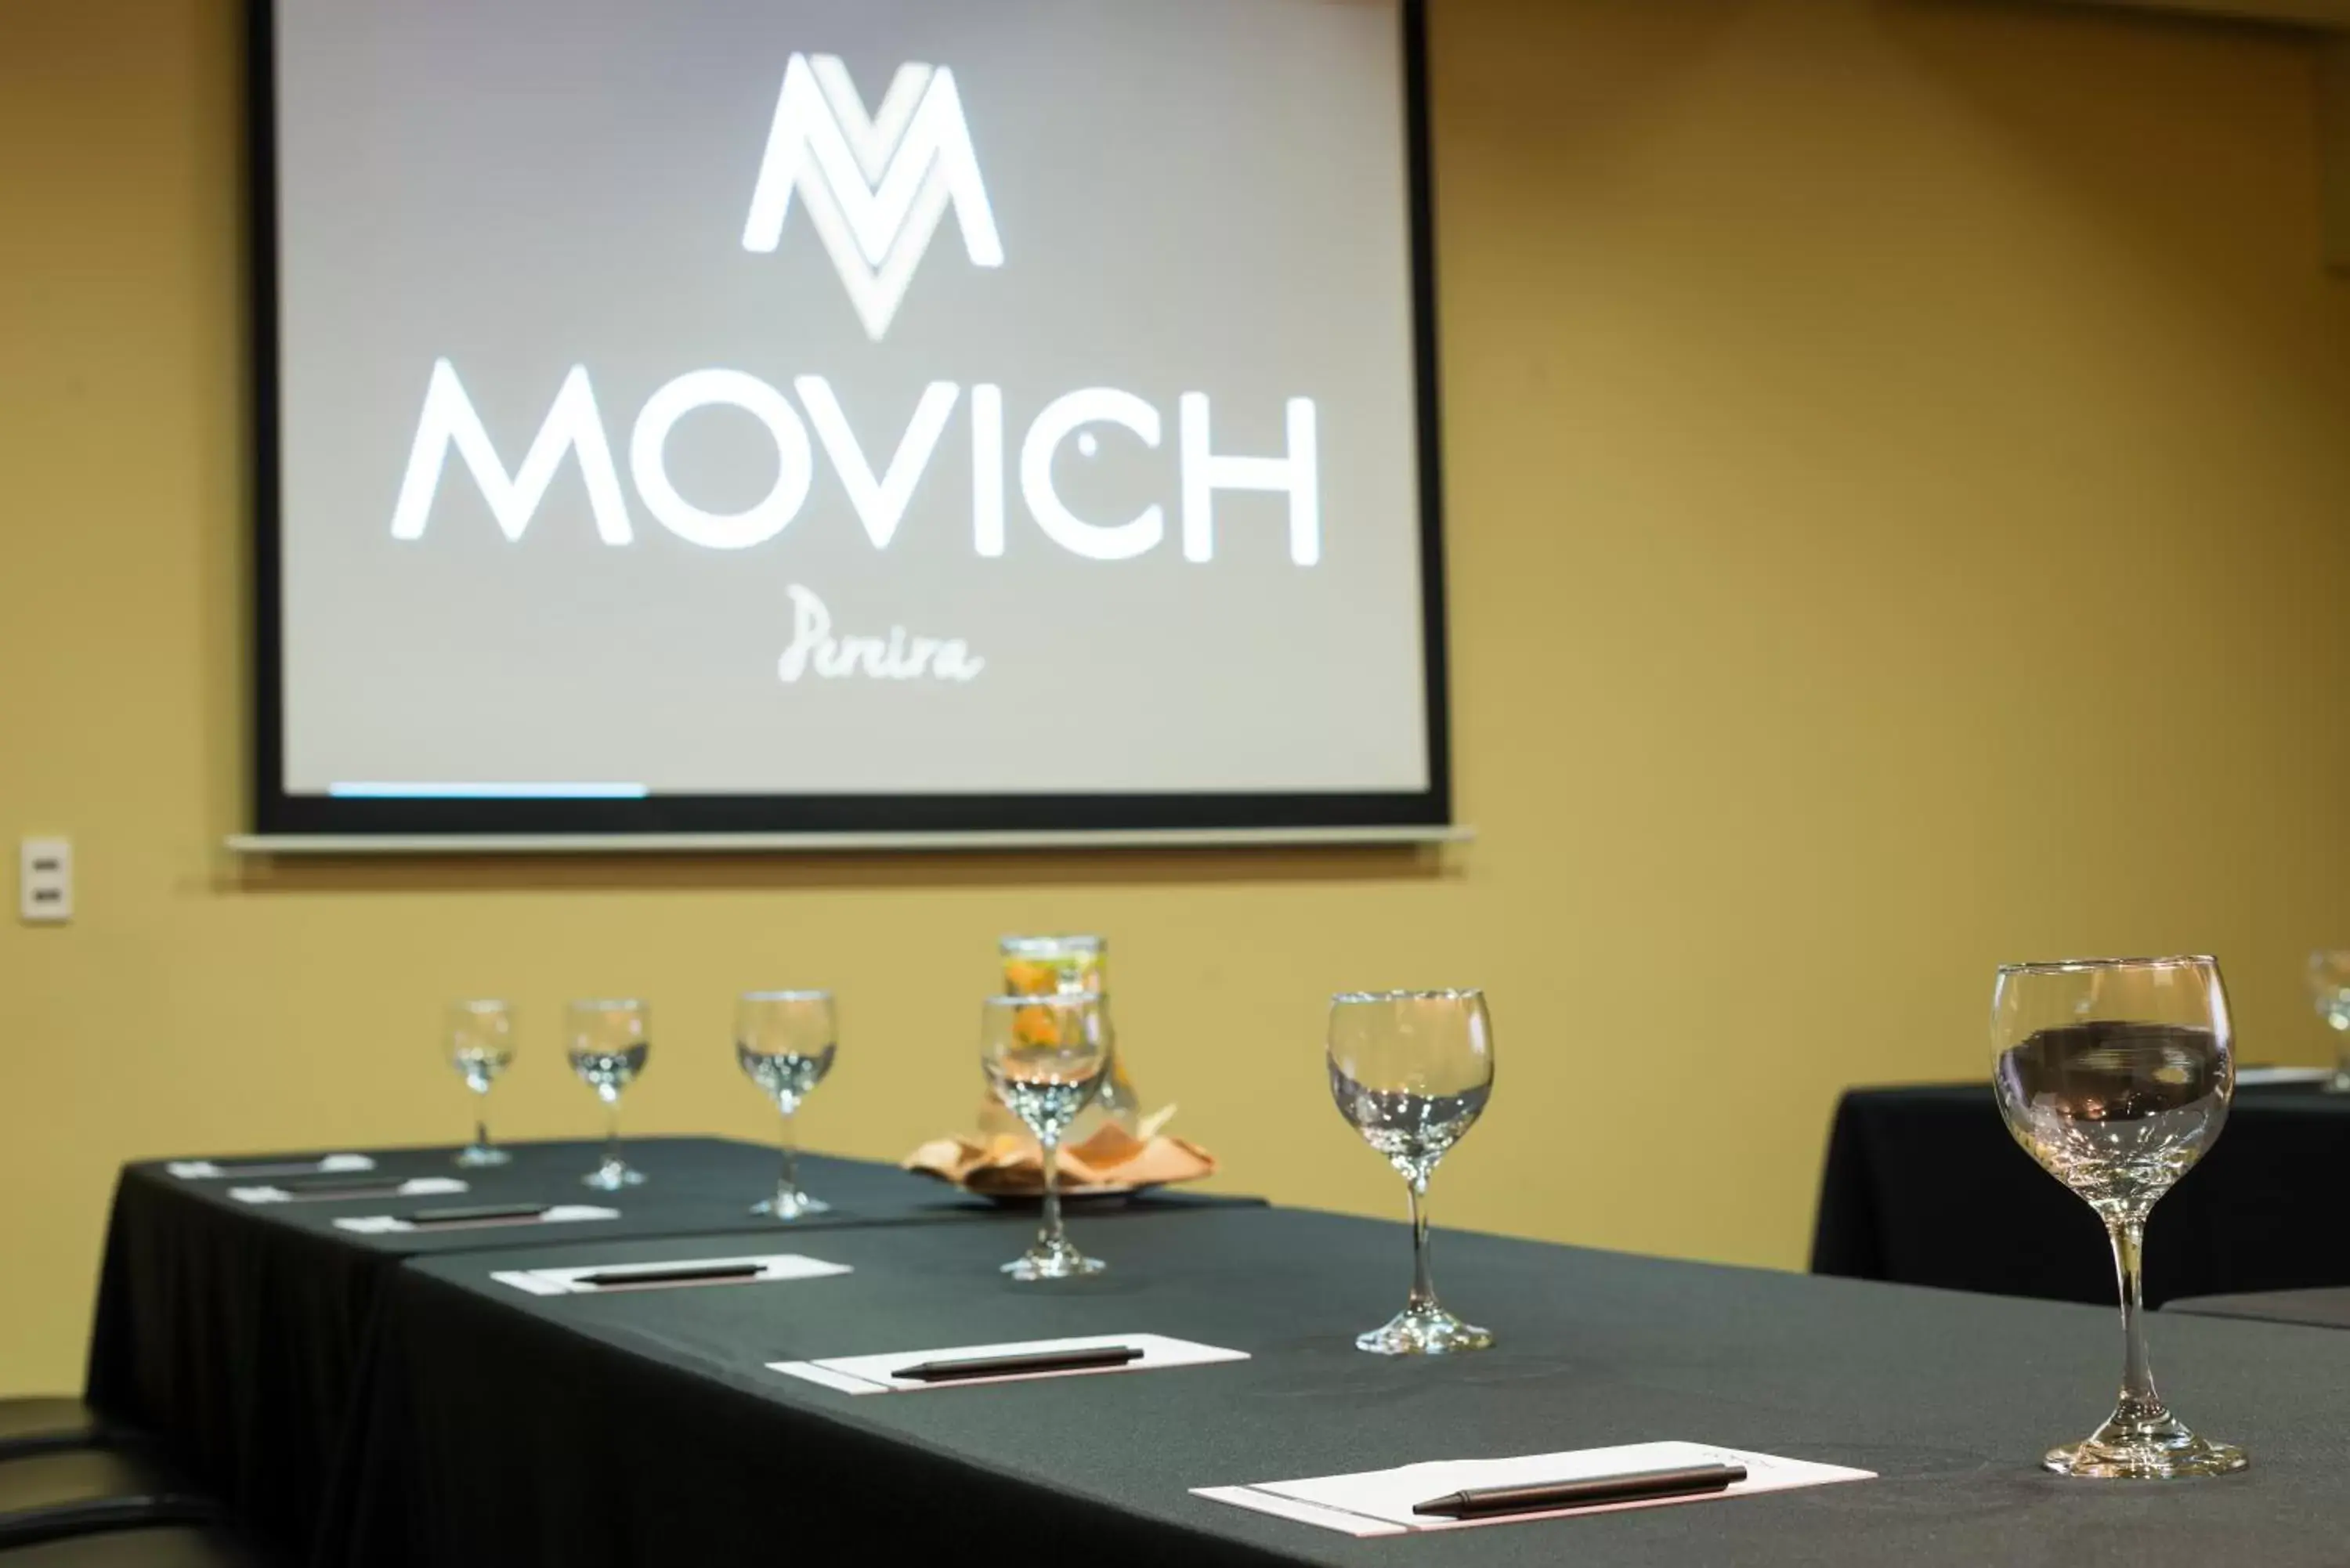 Meeting/conference room in Movich Hotel de Pereira